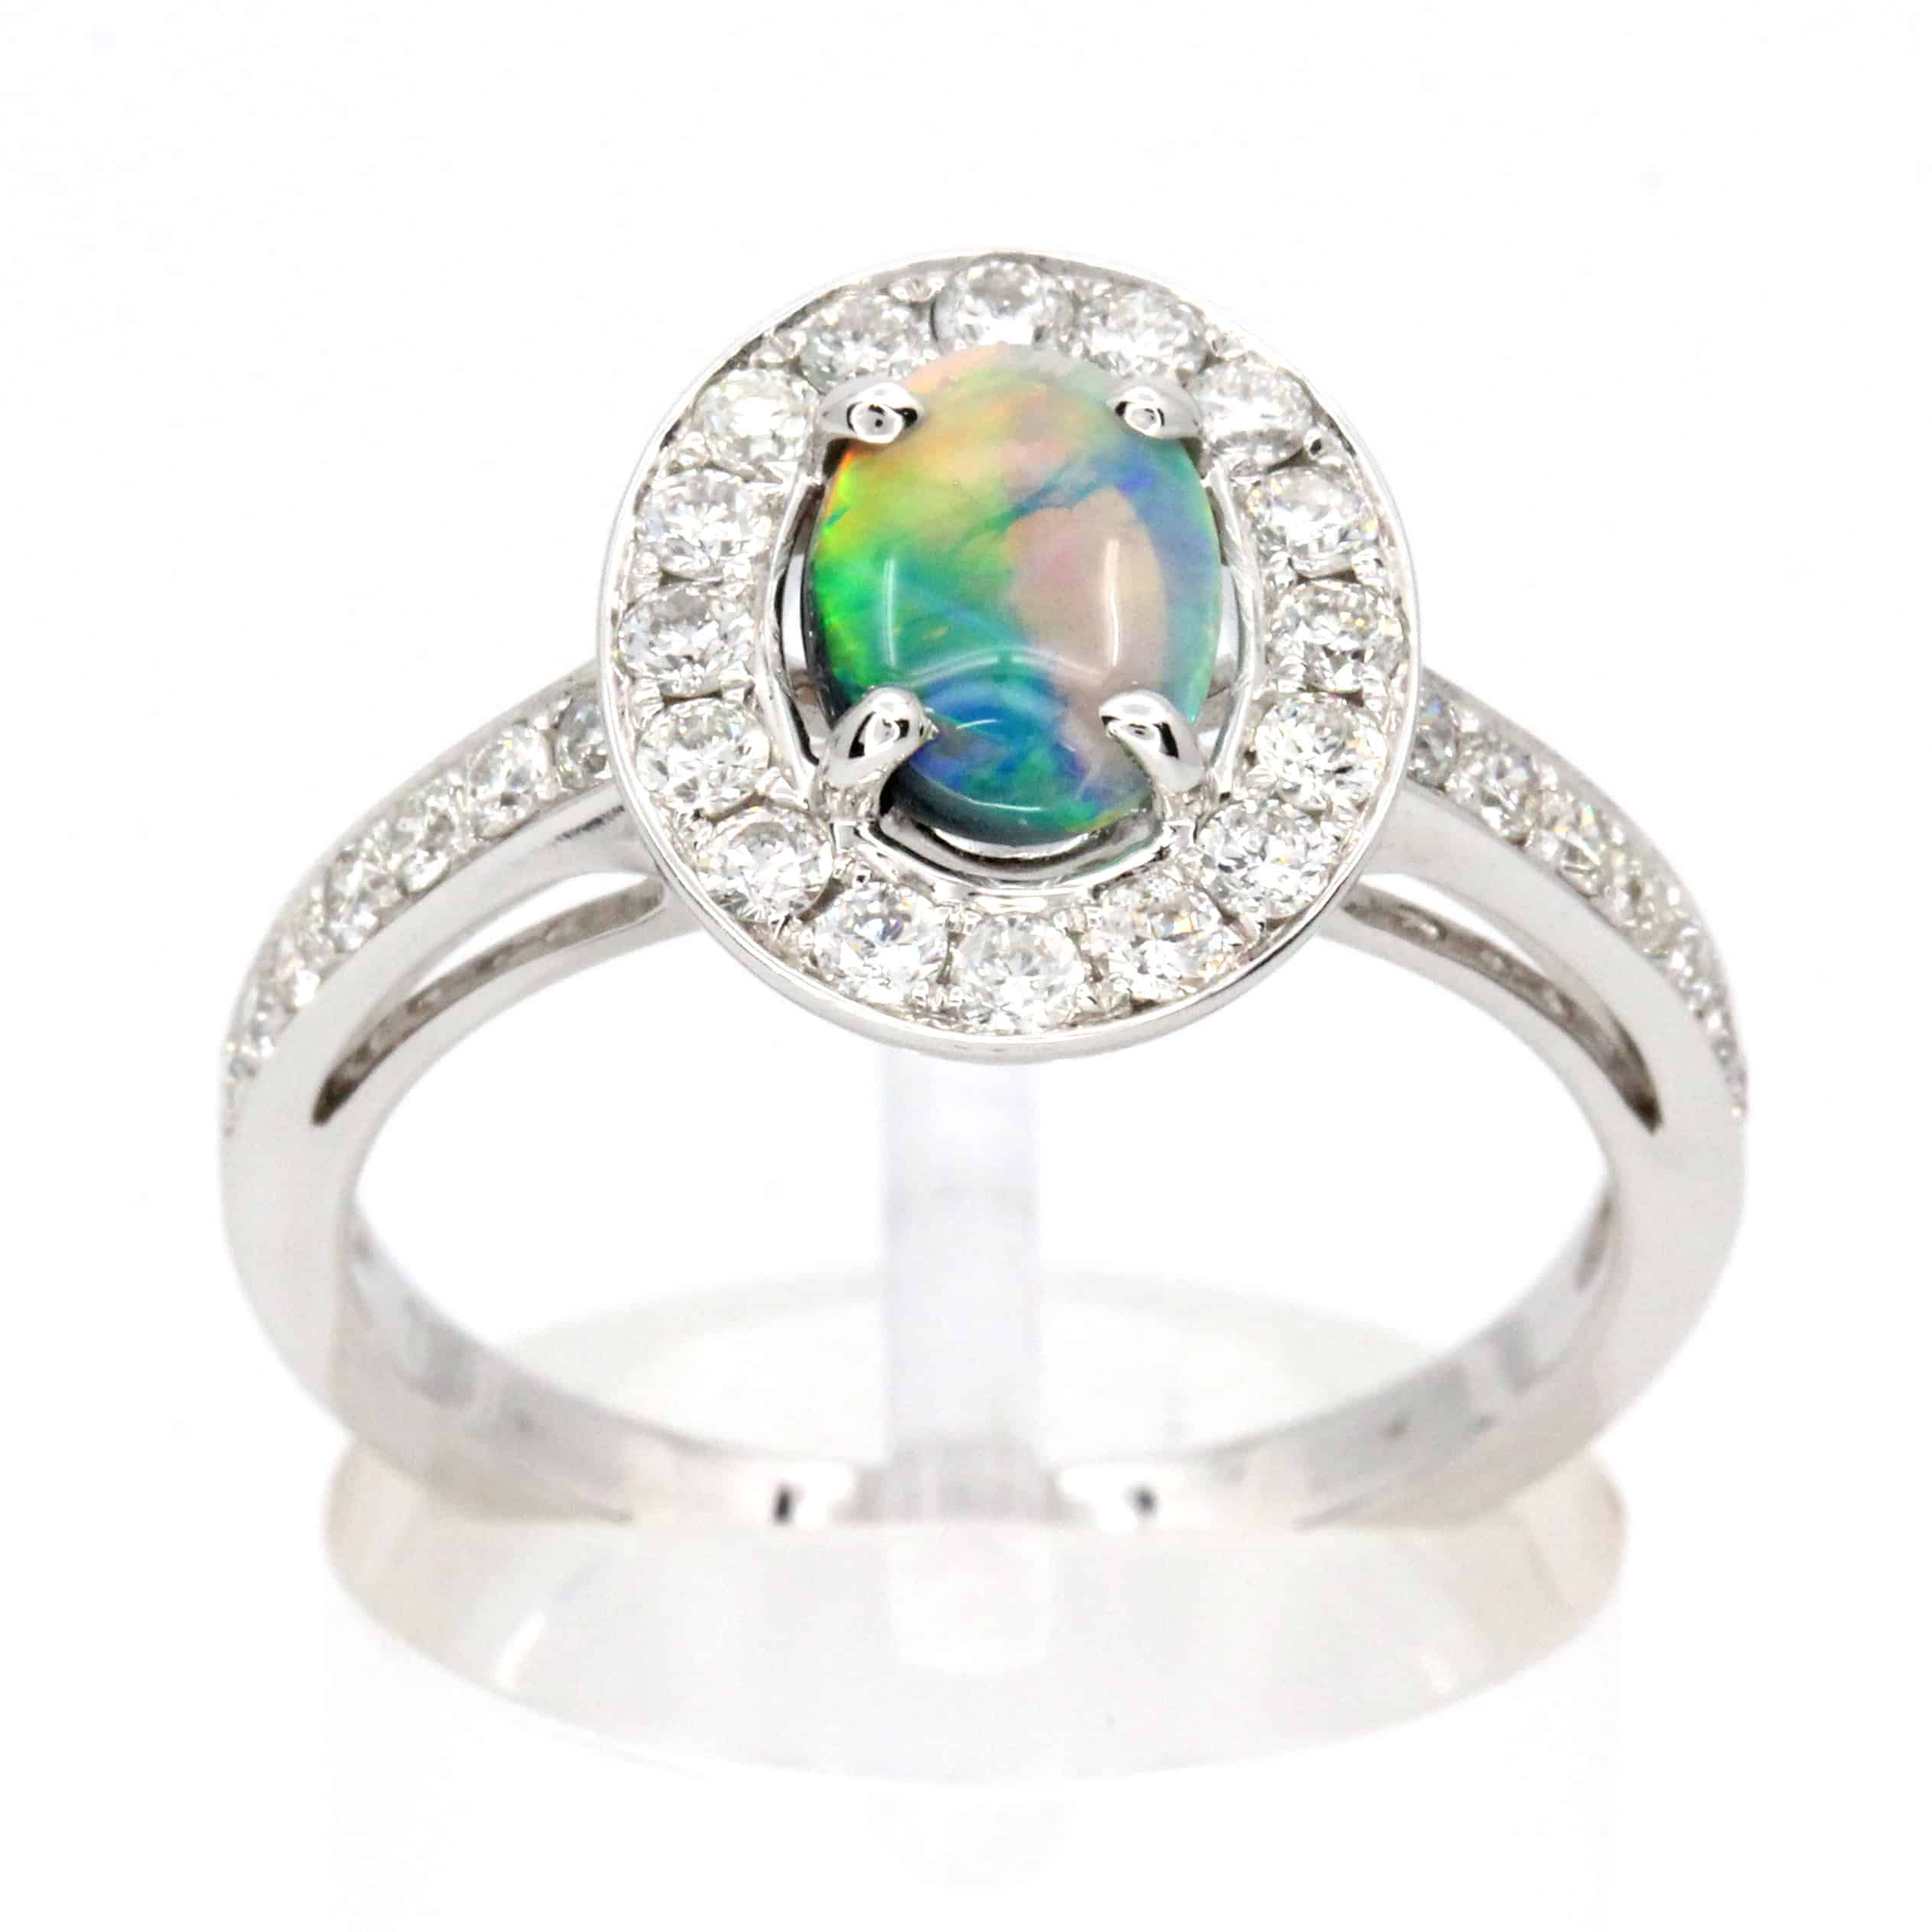 Grey Crystal Opal Ring with Diamond Accents & Halo Allgem Jewellers